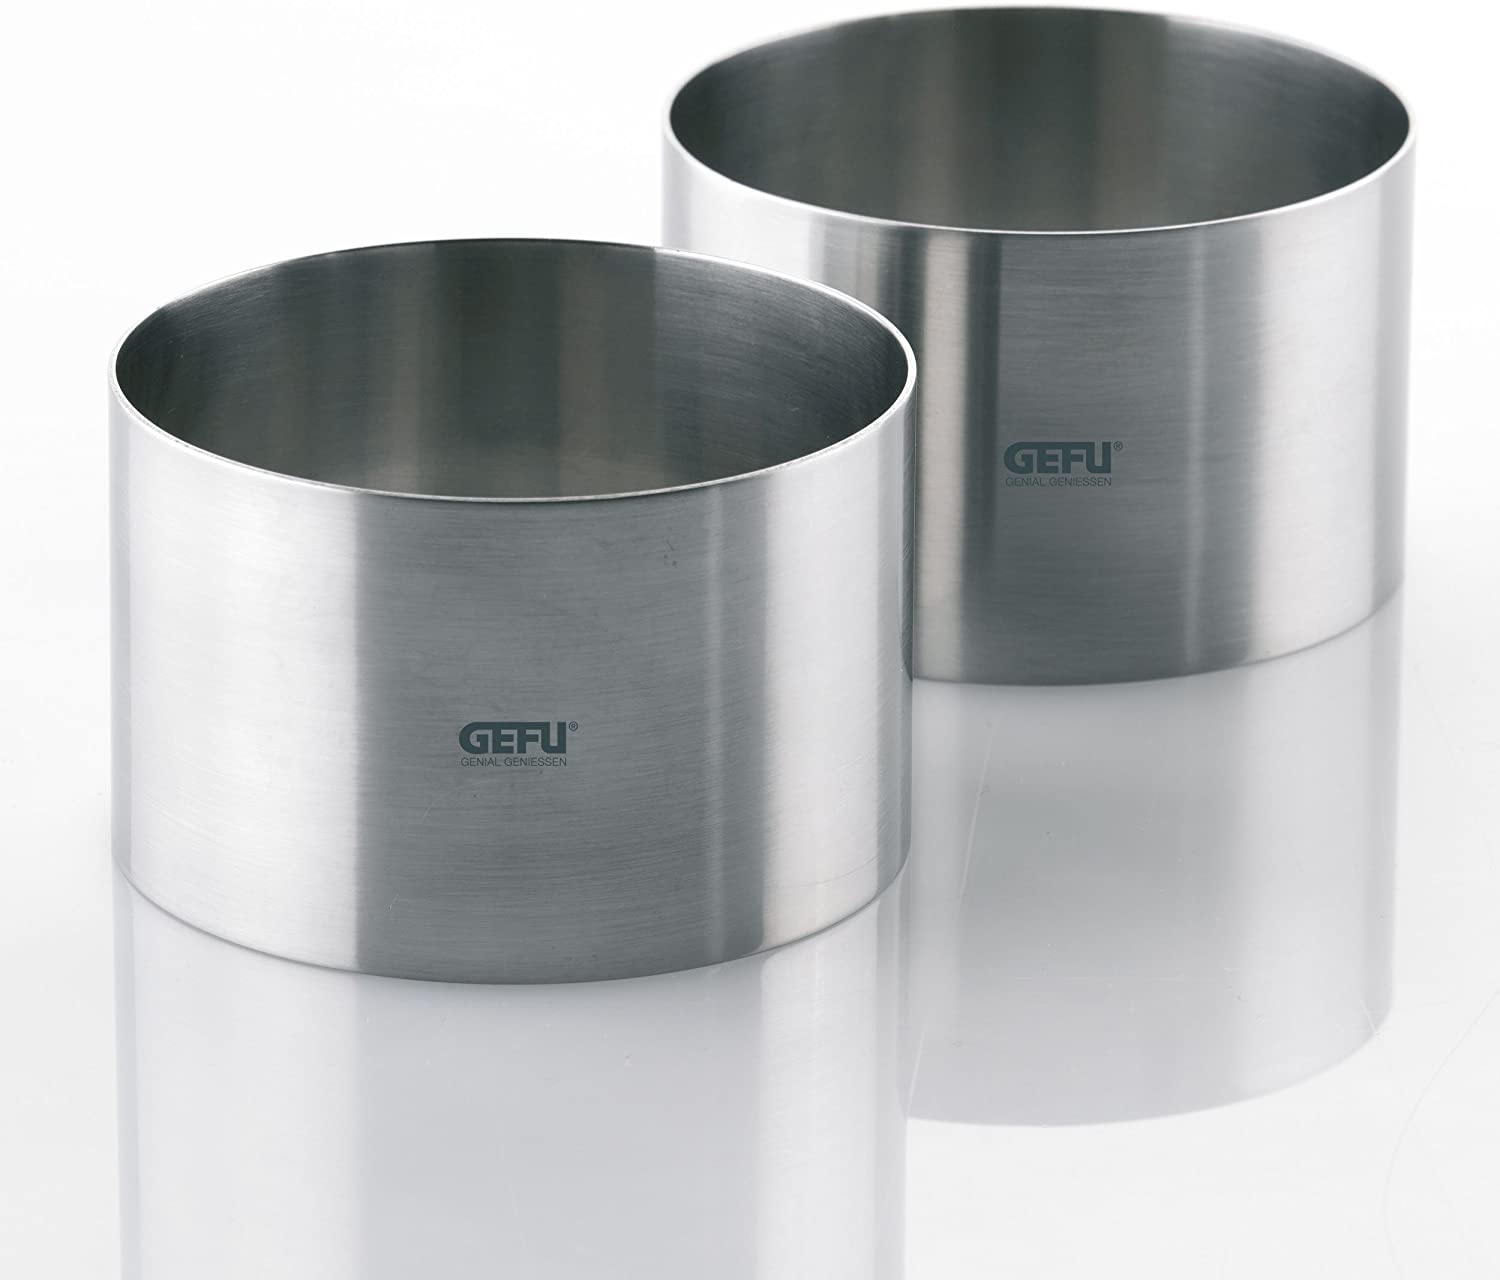 Gefu Rings for Starters and Desserts, Round, with Presser, Stainless Steel, 7.6 cm, 2 Pieces, 12160